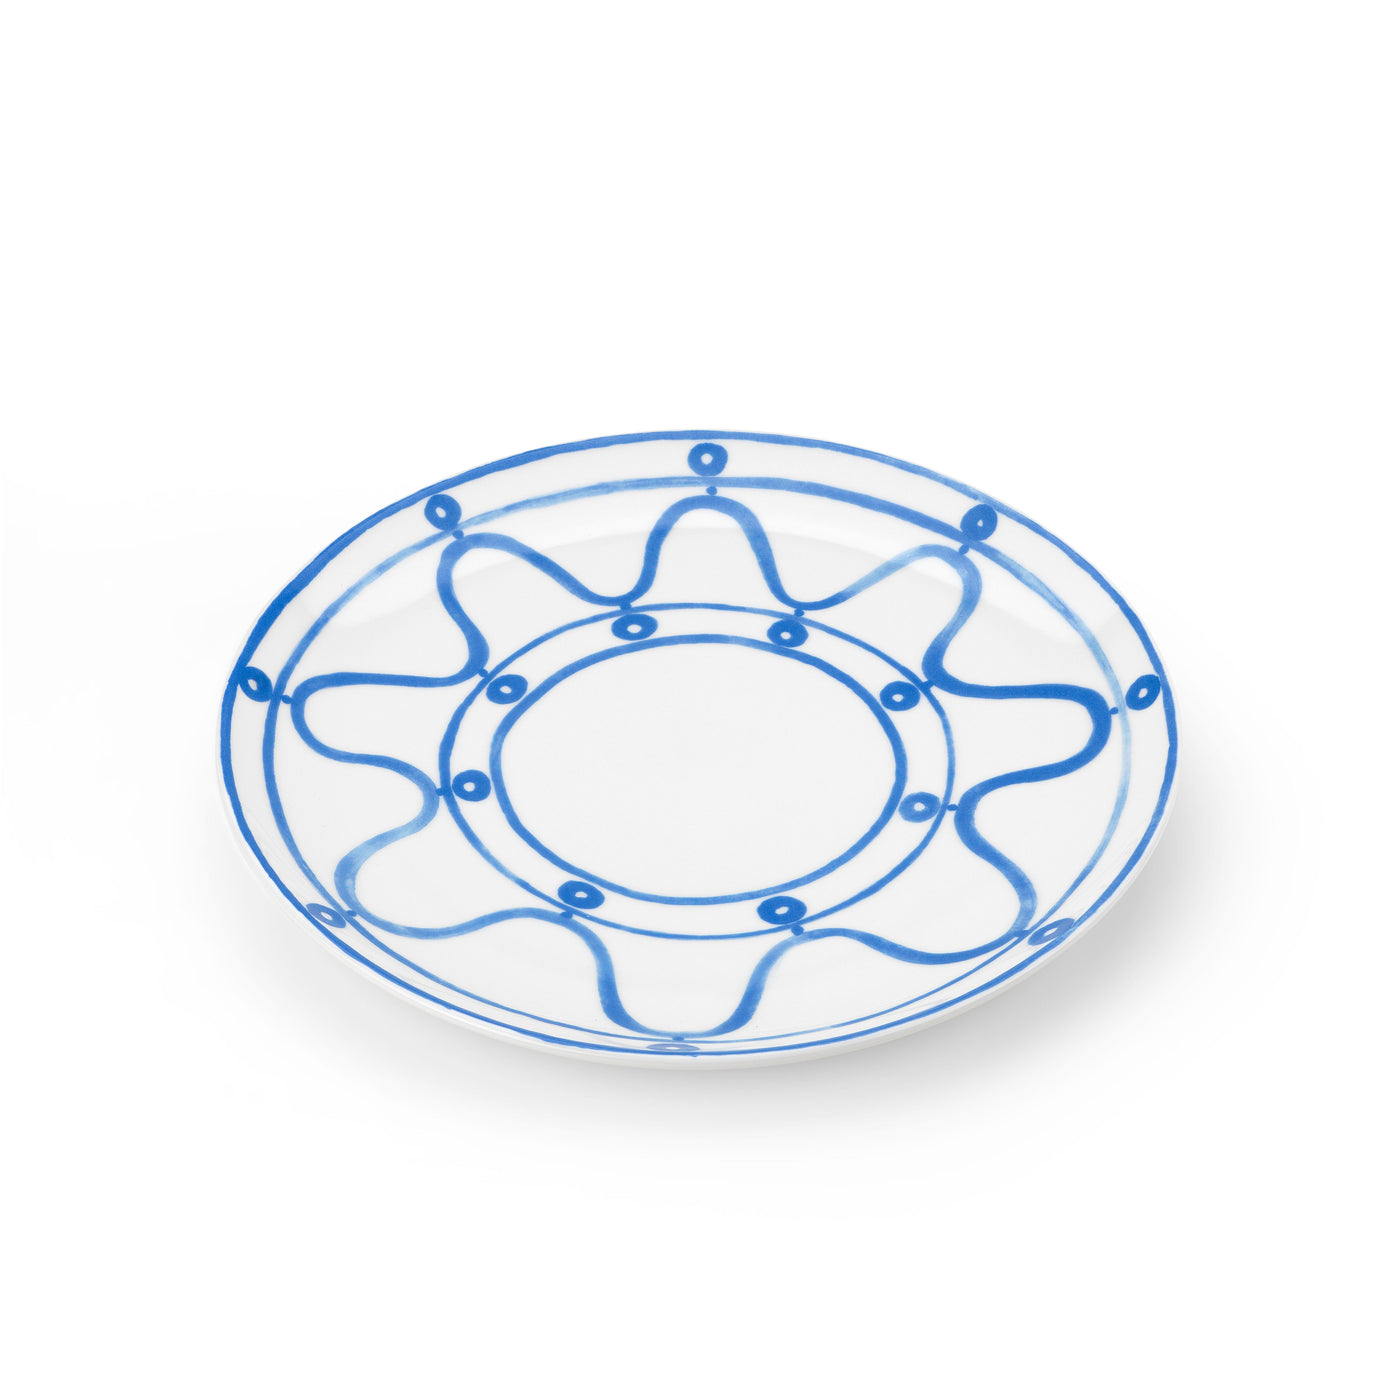 Serenity Charger Plate in Blue